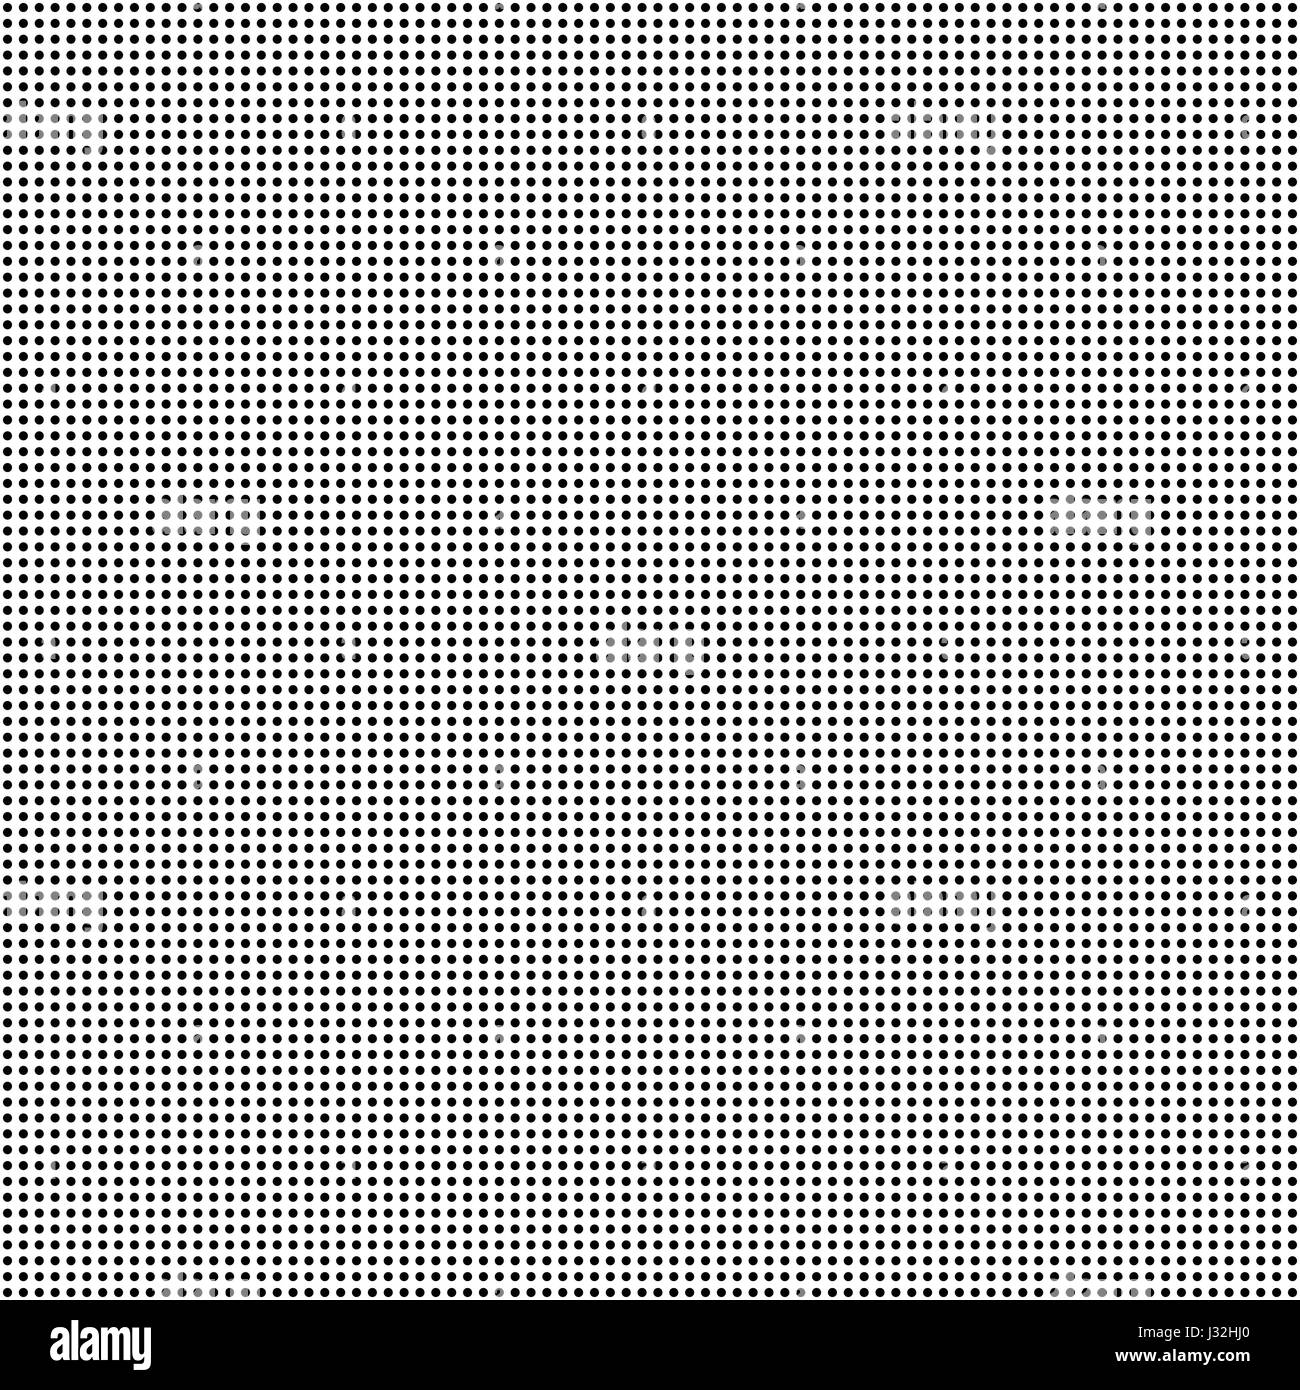 Dots halftone pattern background Stock Vector